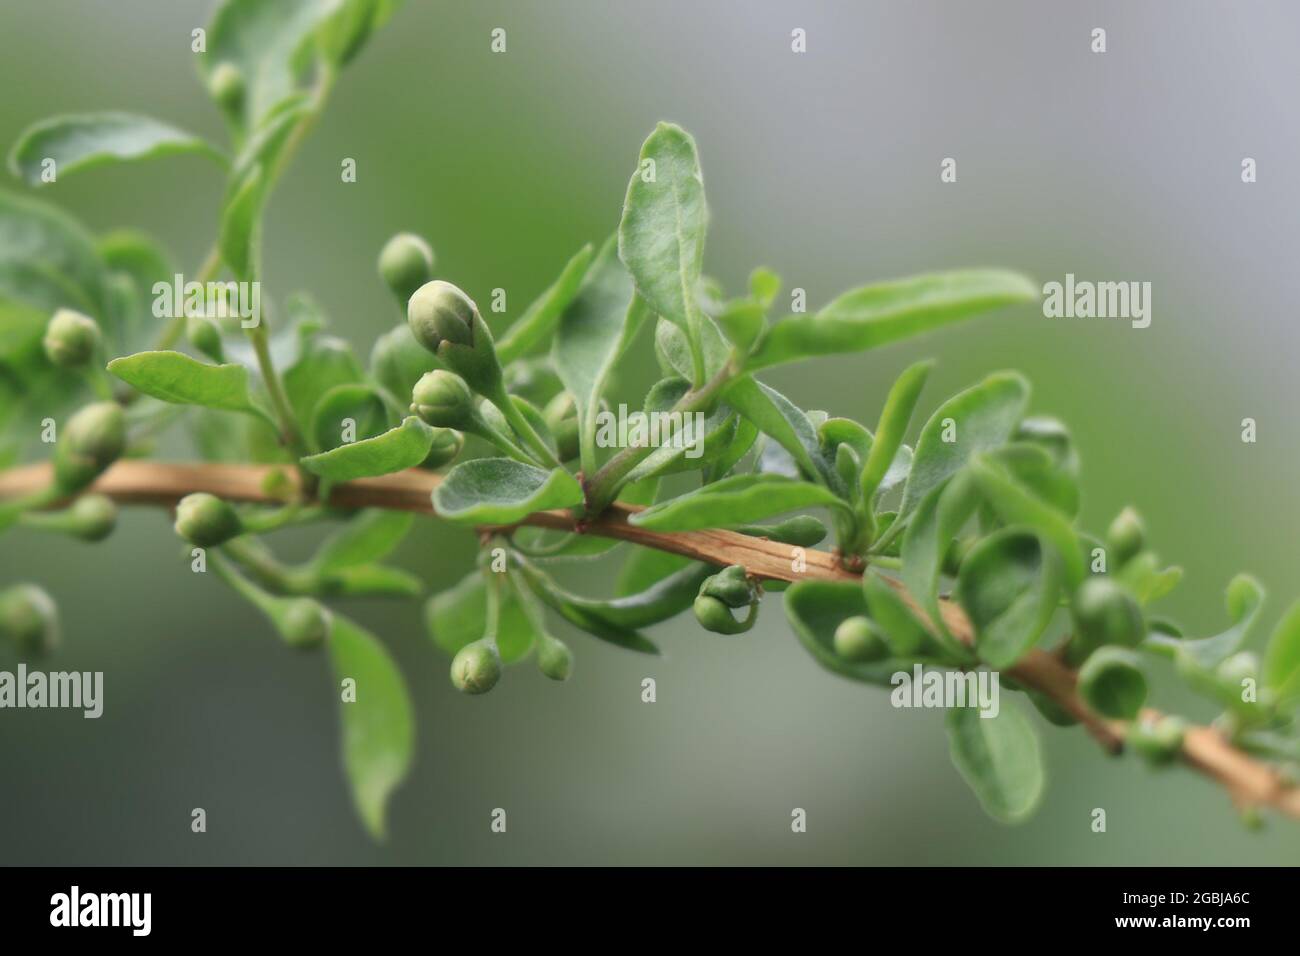 Before Bloom of Goji berry Chinese wolfberry with green background Stock Photo